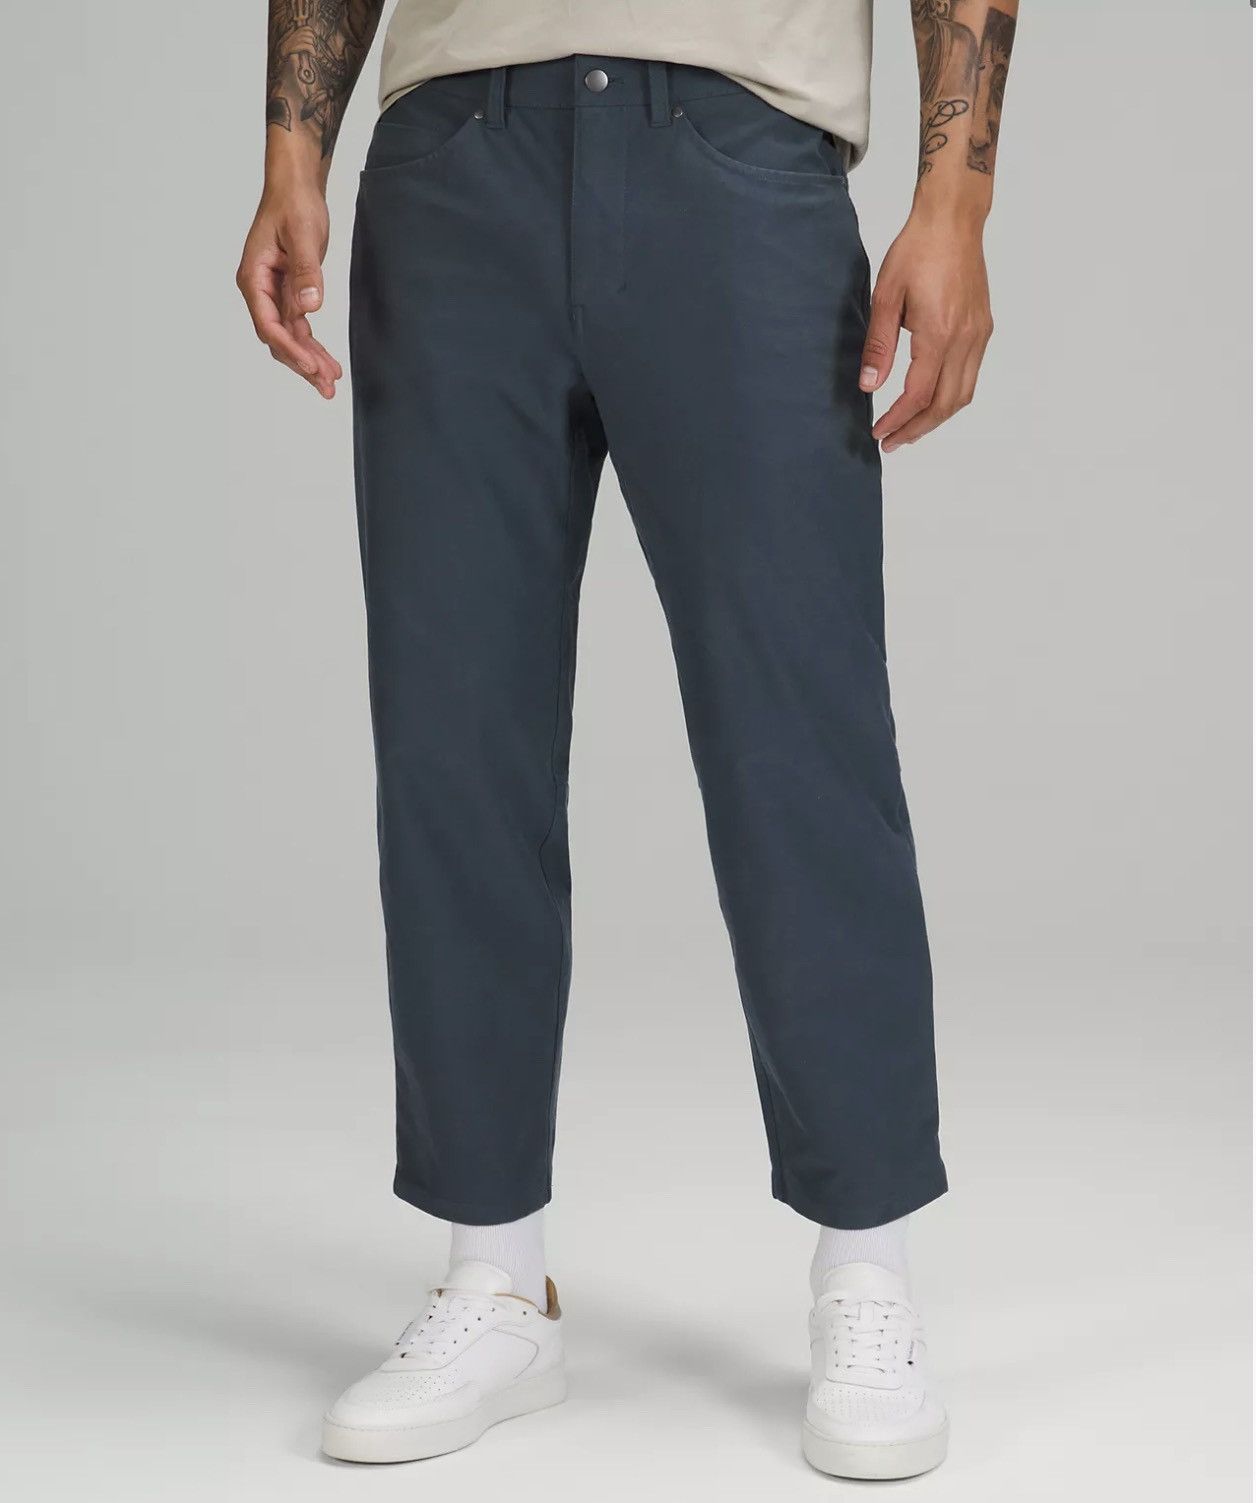 Lululemon ABC Relaxed-Fit Cropped Pant Utilitech | Grailed